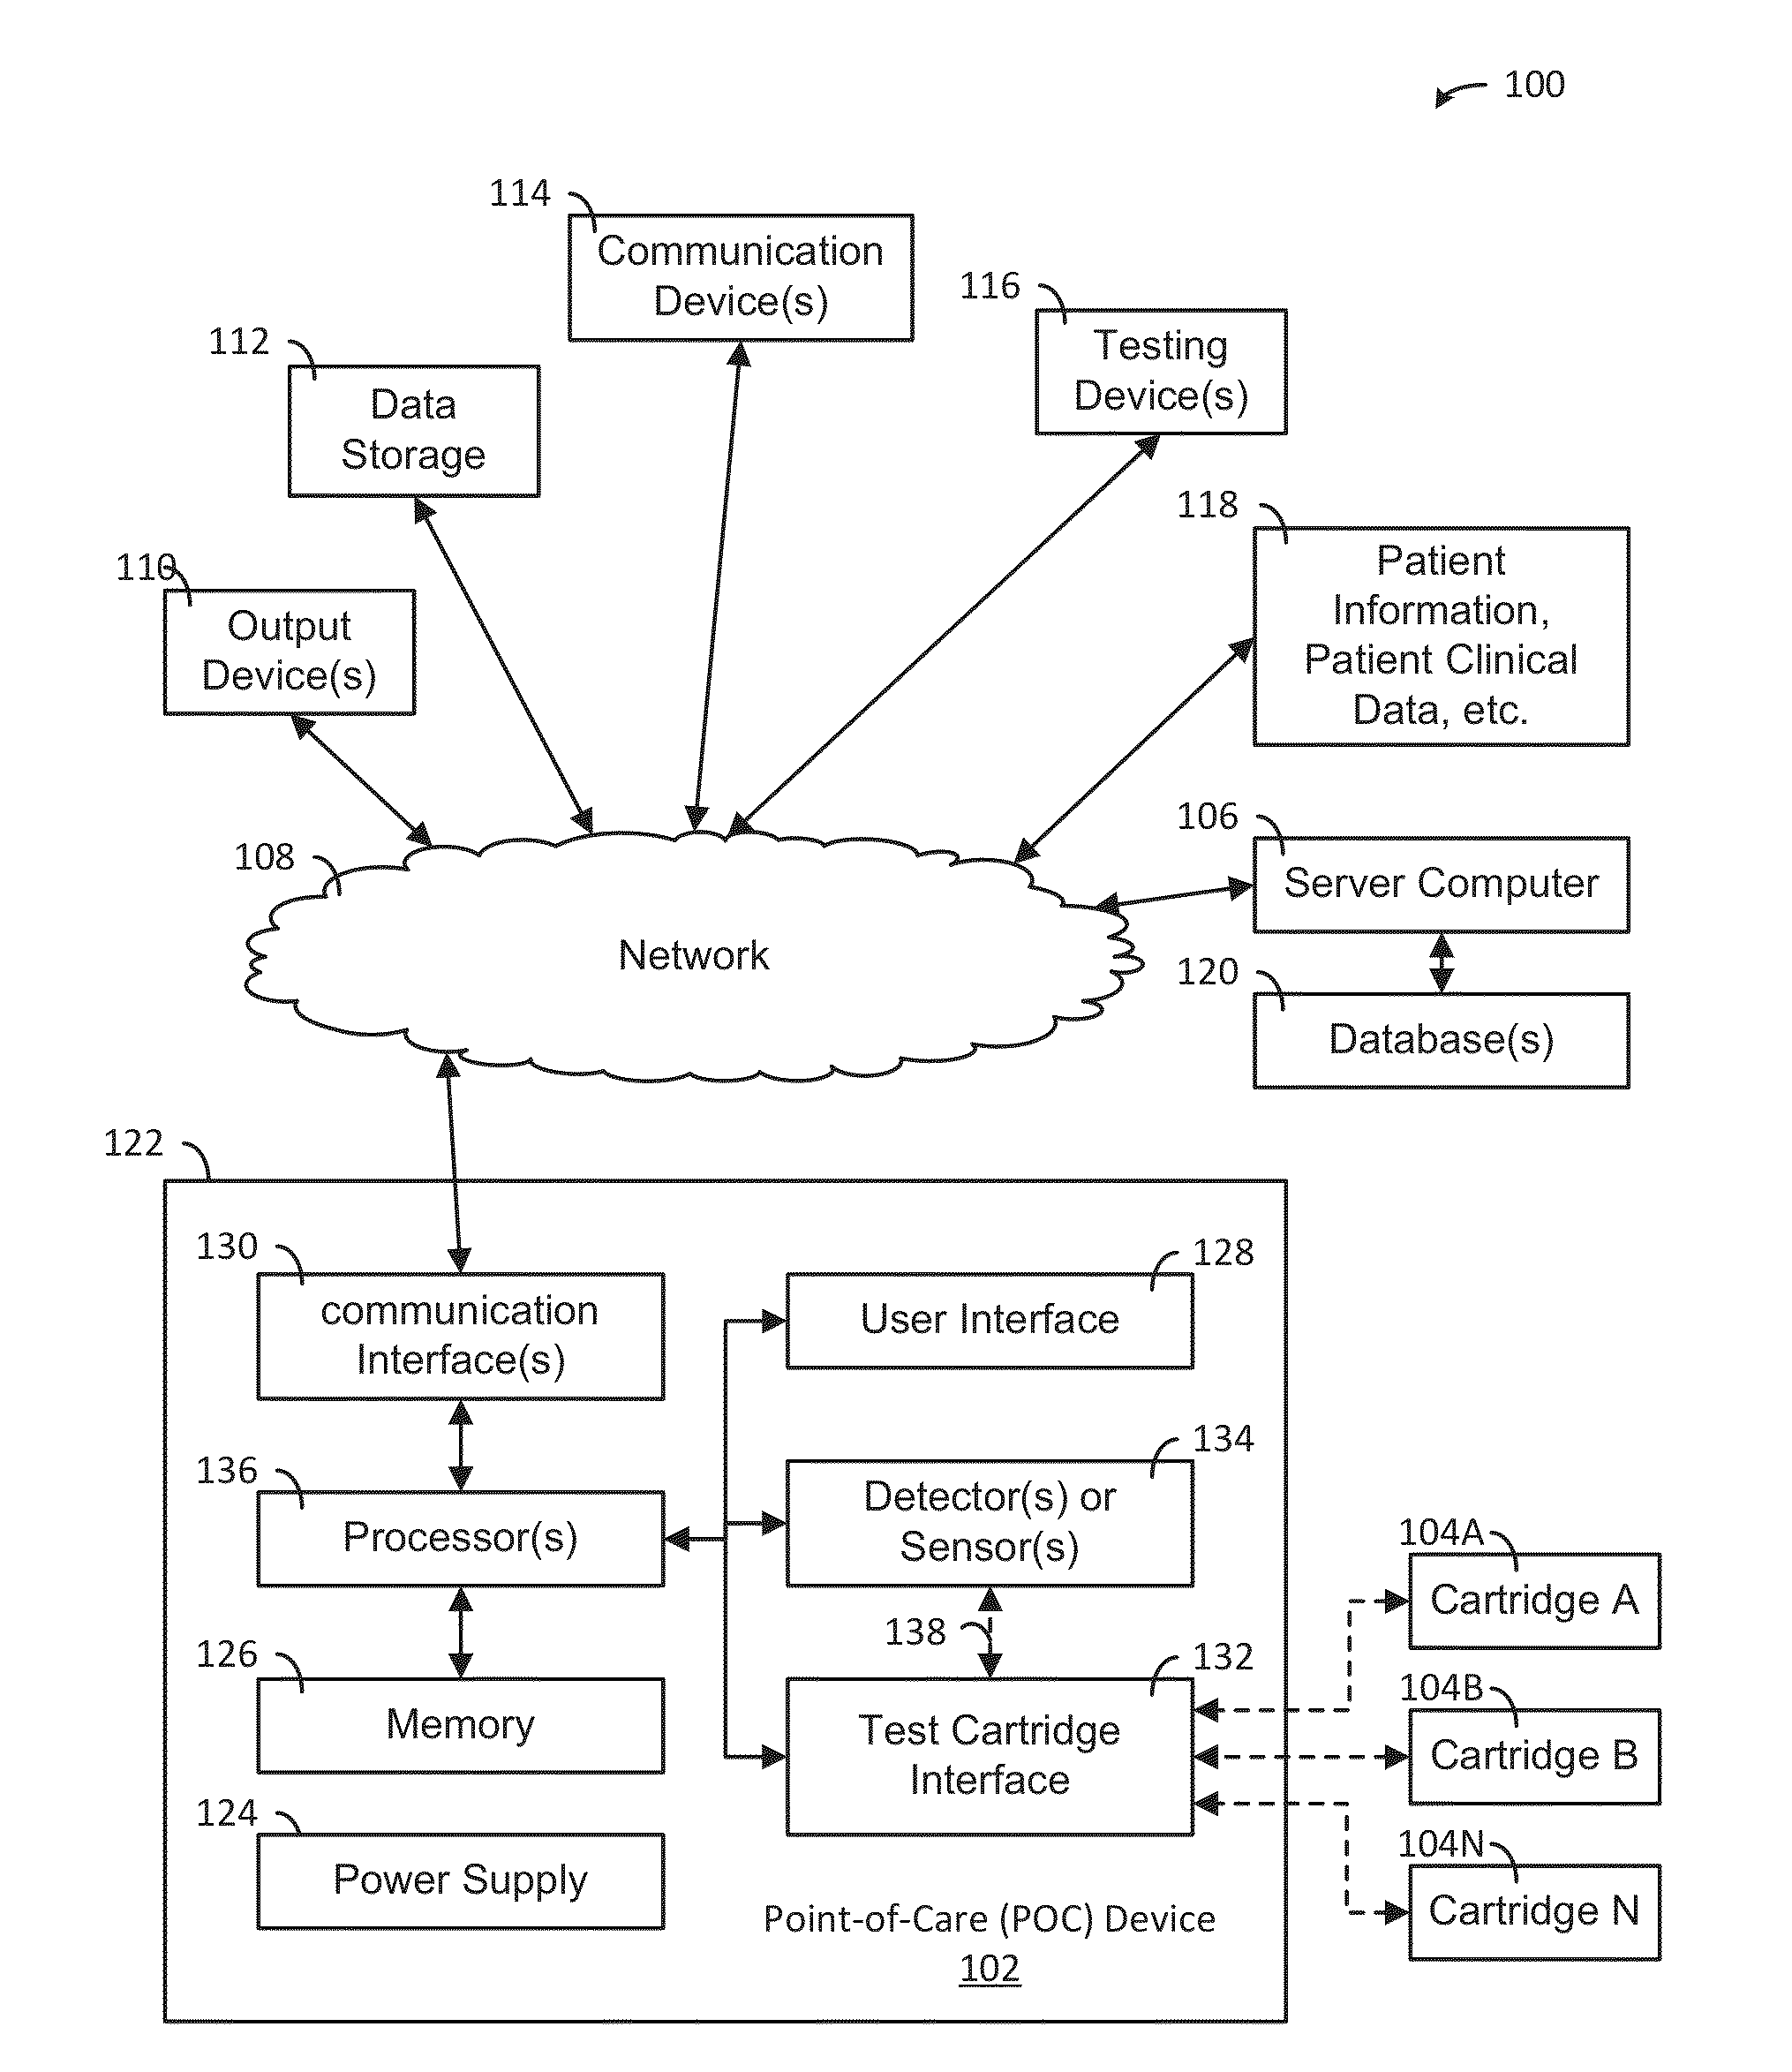 System, Apparatus and Method for Evaluating Samples or Analytes Using a Point-of-Care Device